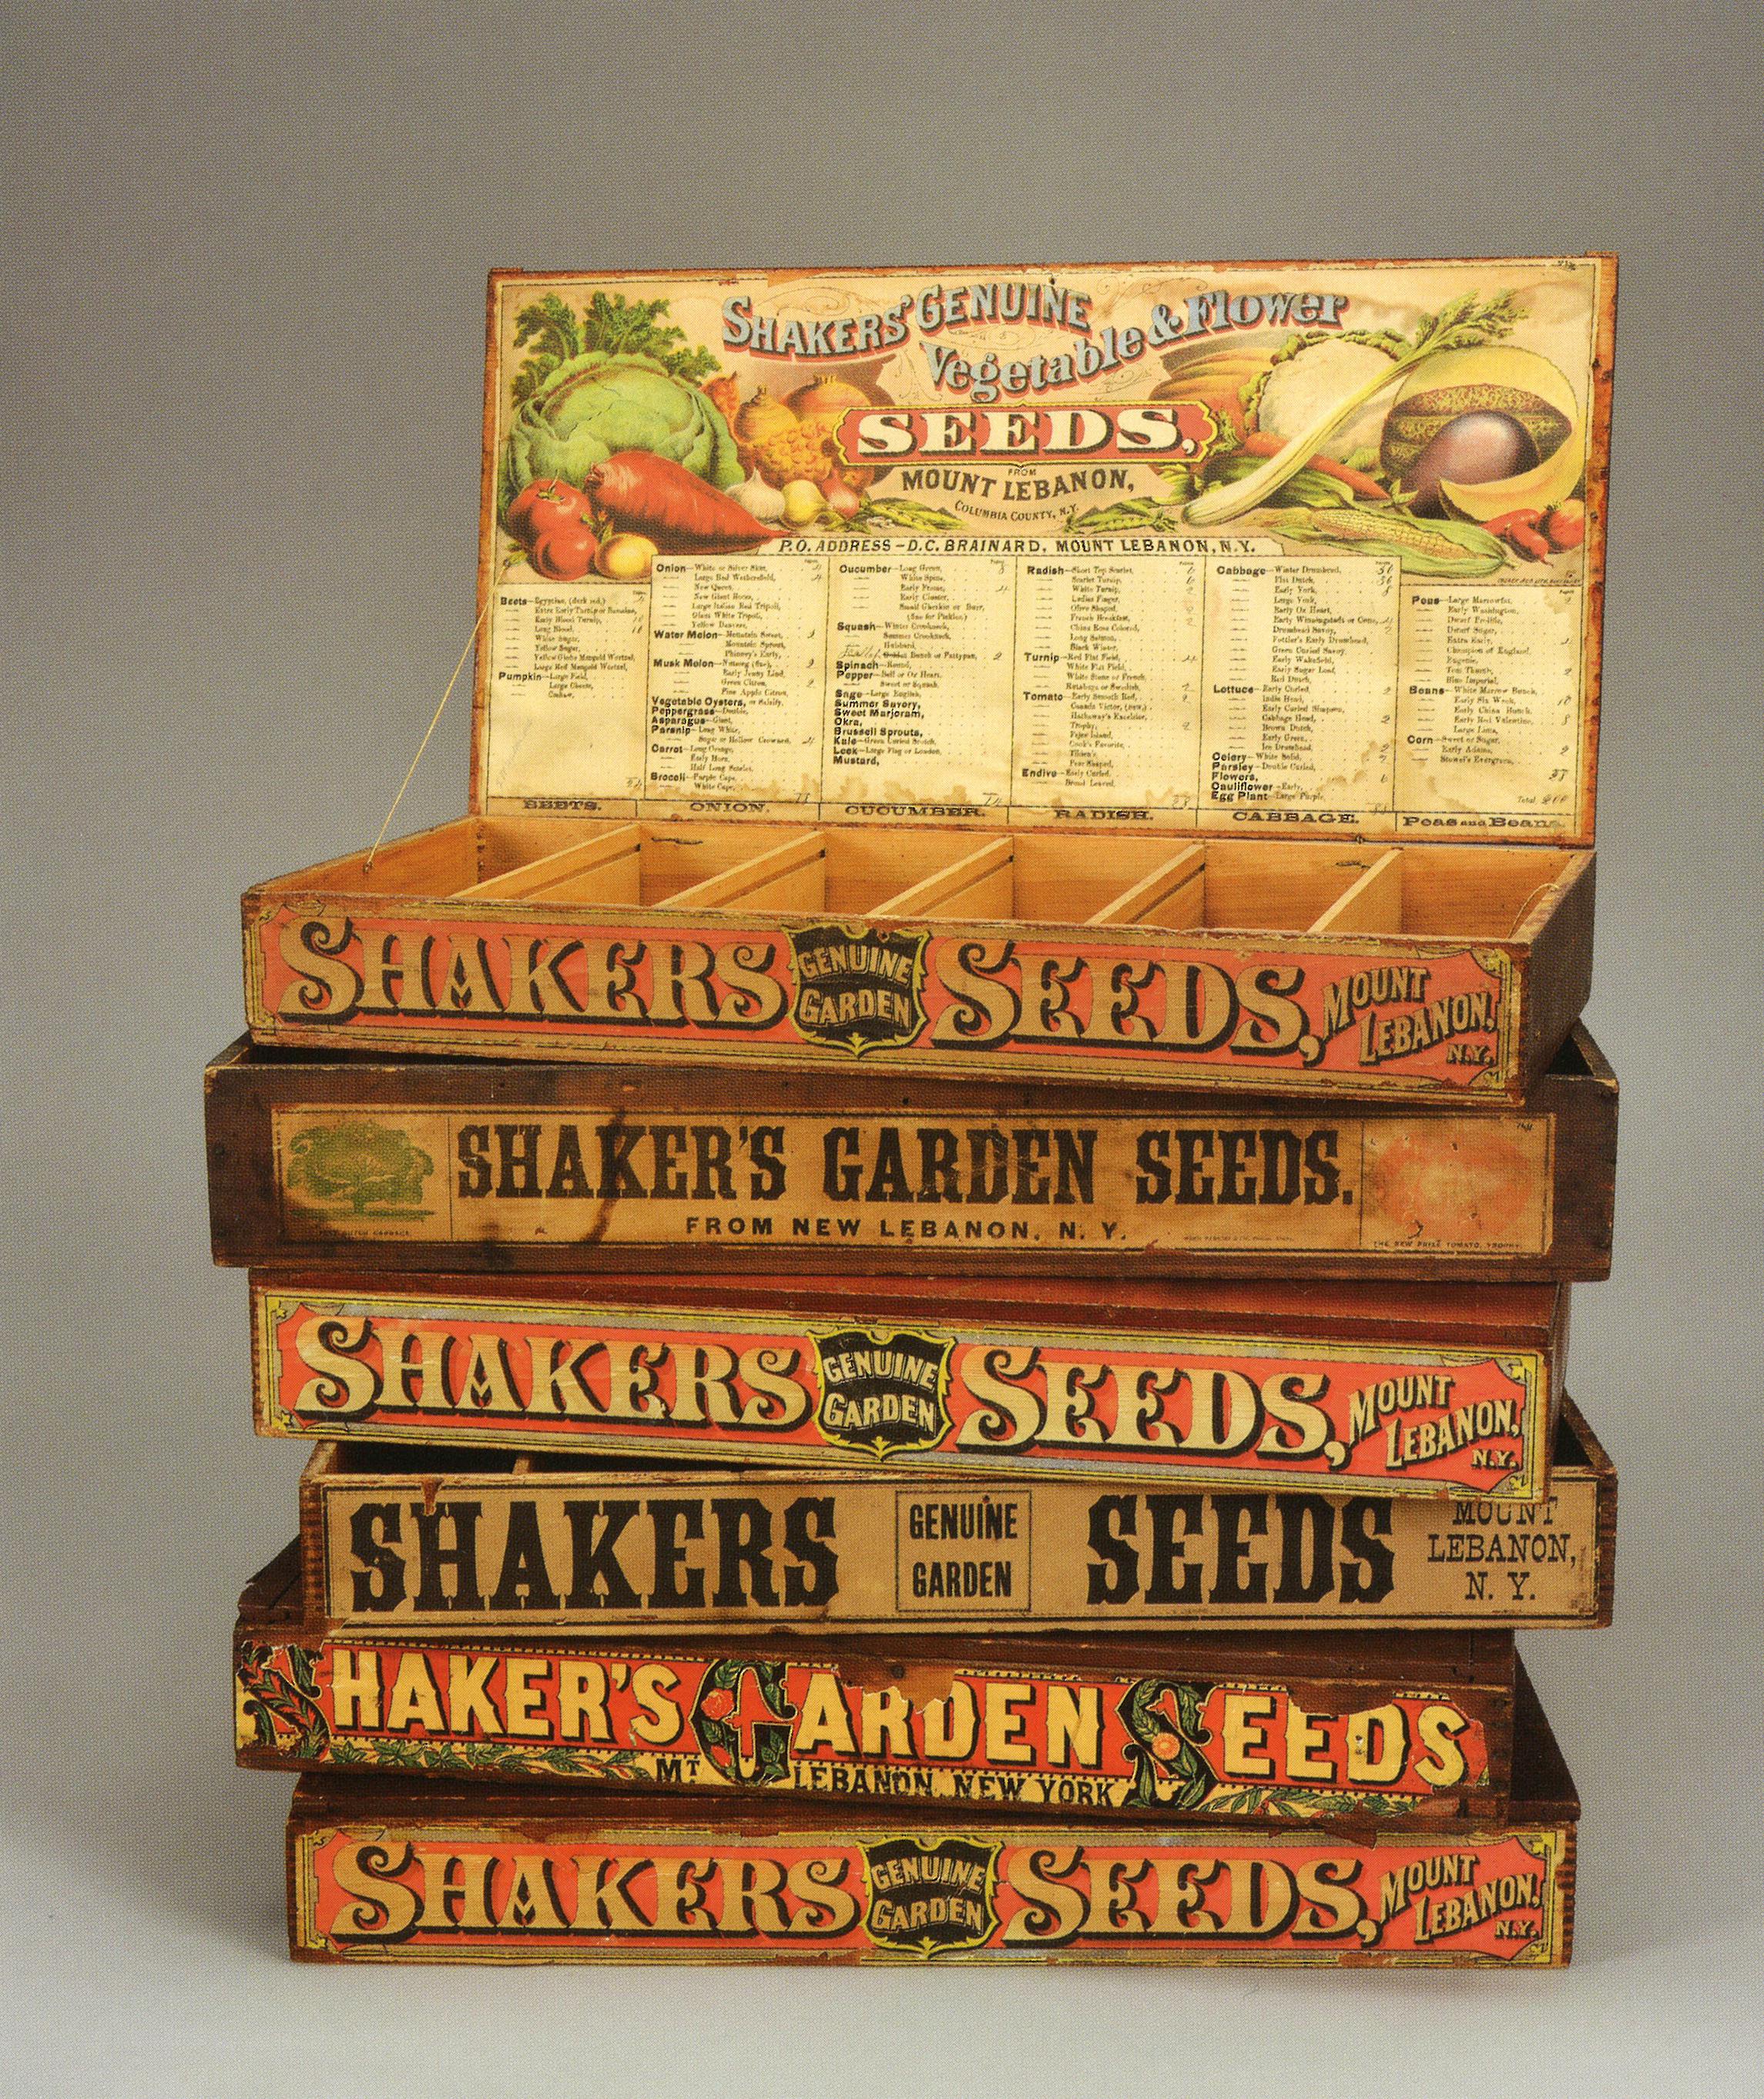 Shaker seed boxes, collection of the Shaker Museum at Mount Lebanon